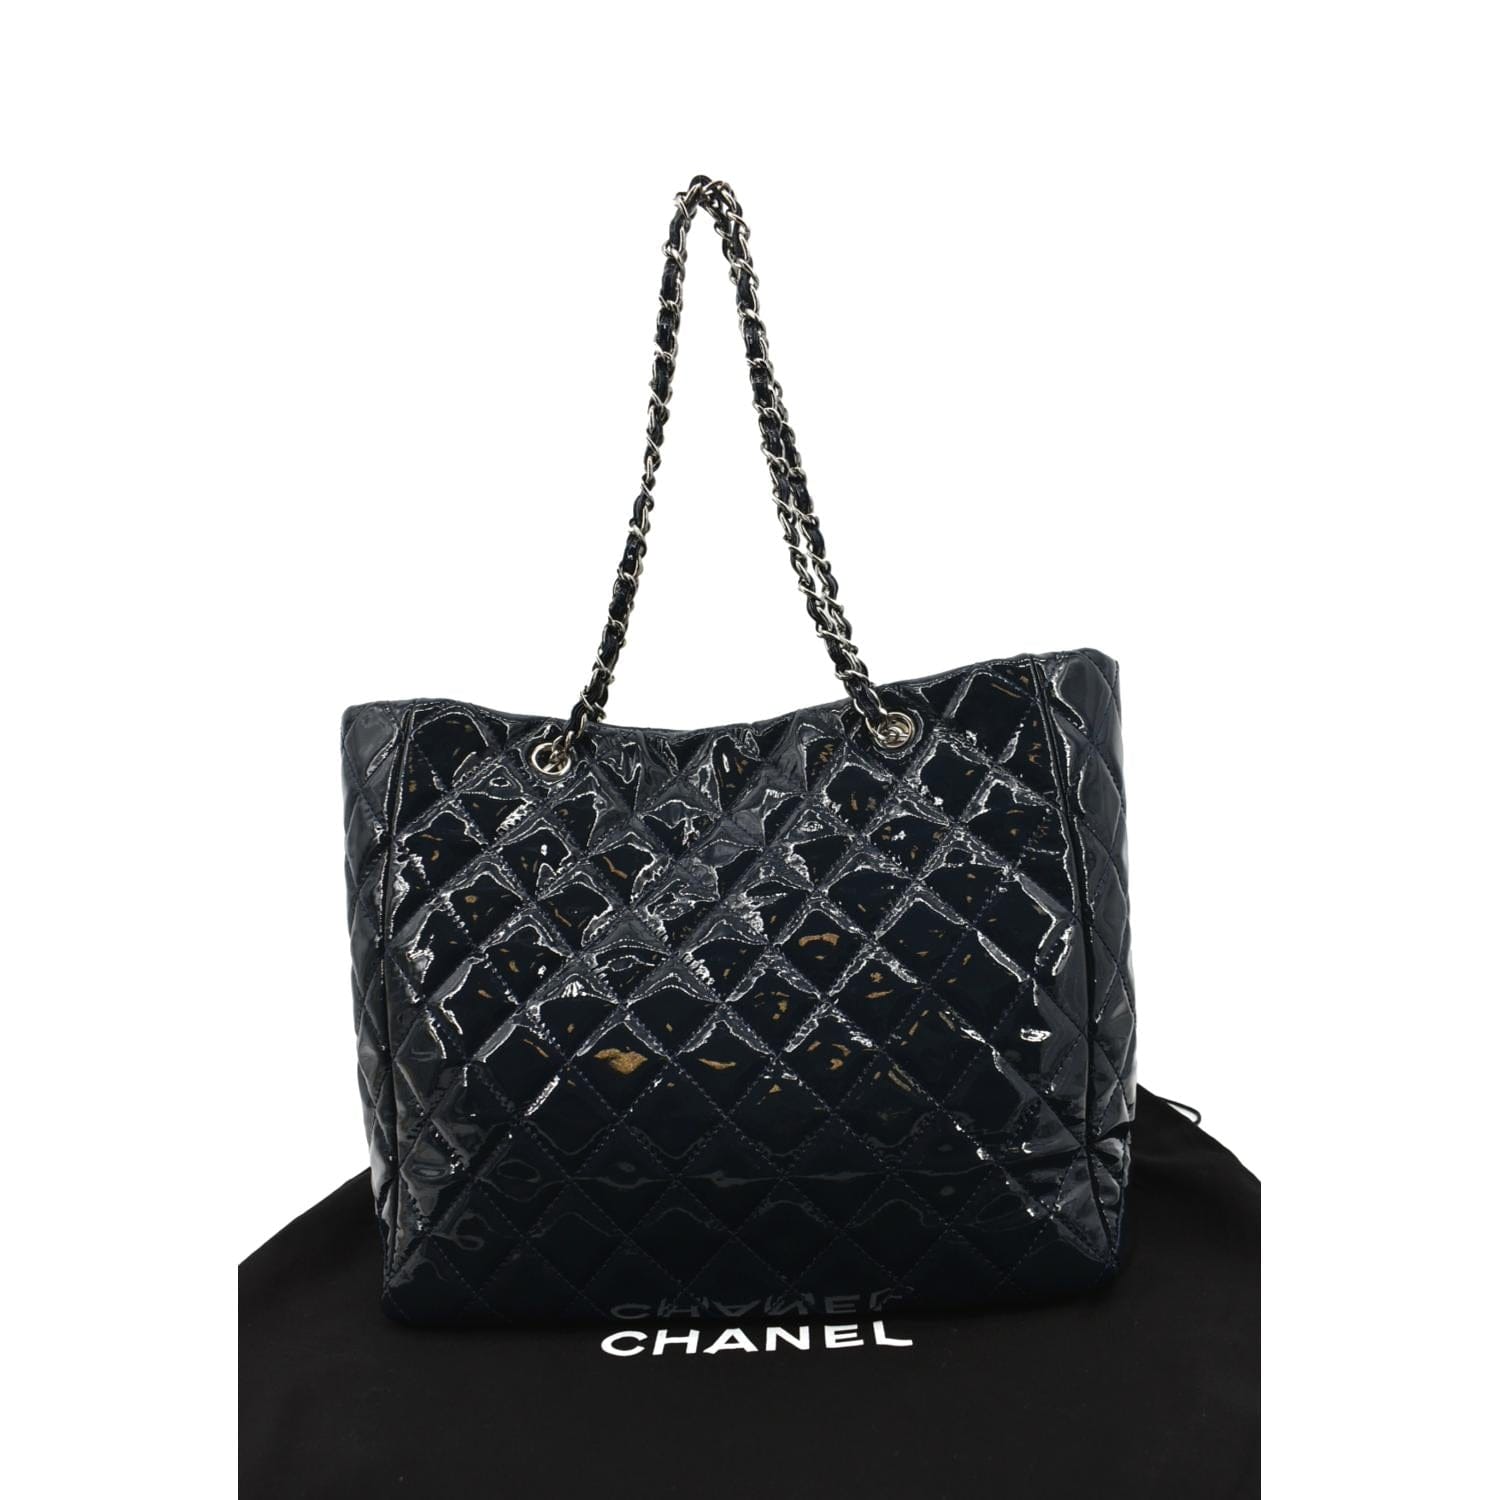 Chanel Chic Glitter Large Patent Leather Tote Bag Blue